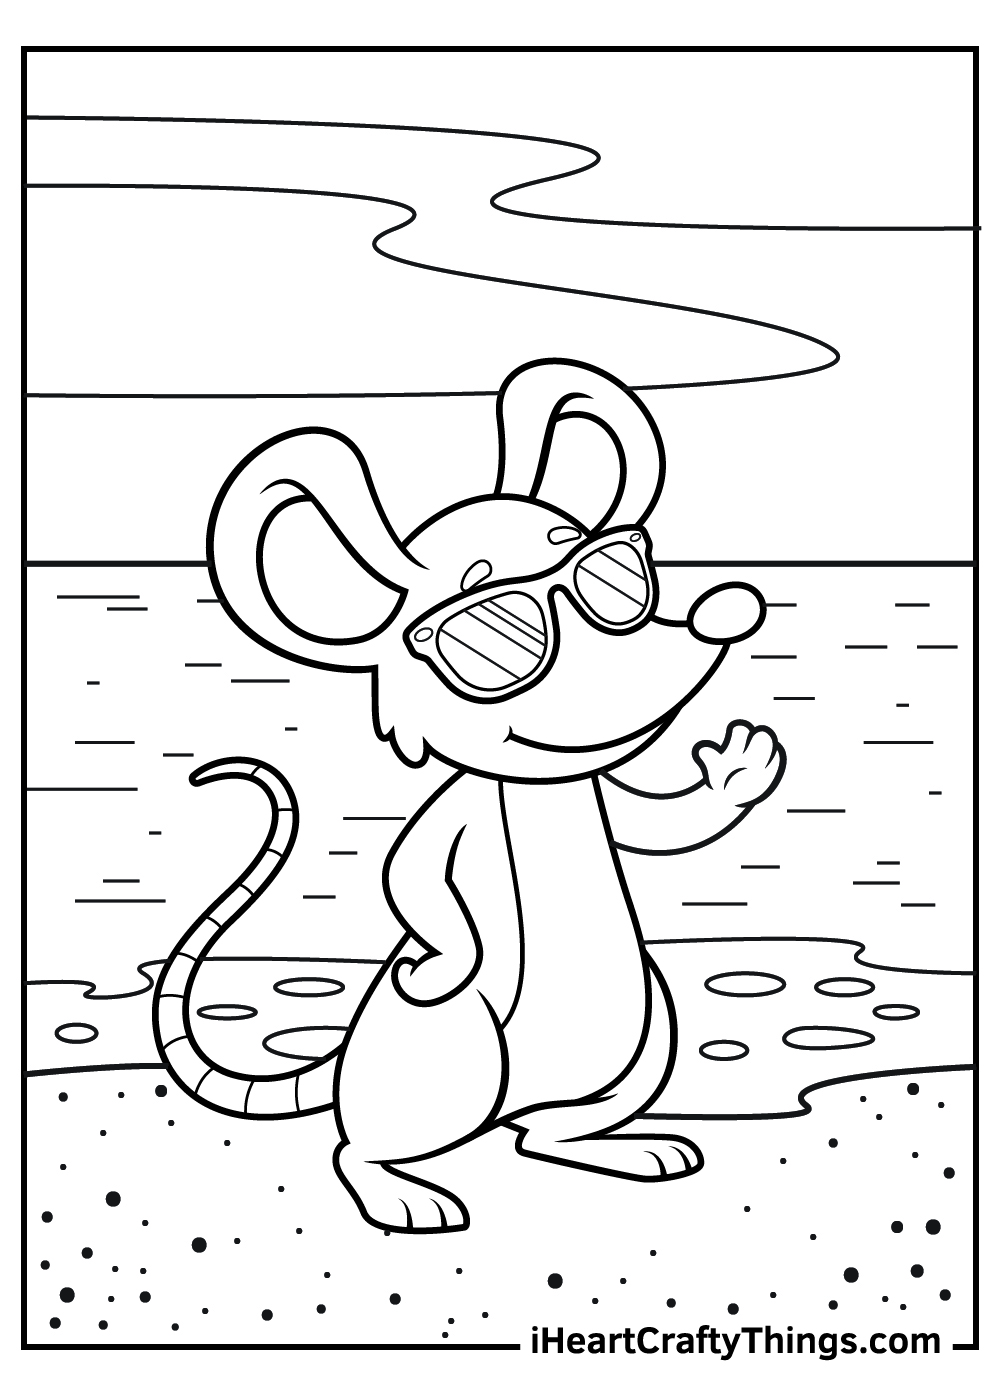 Mouse Coloring Pages (Updated 2021)